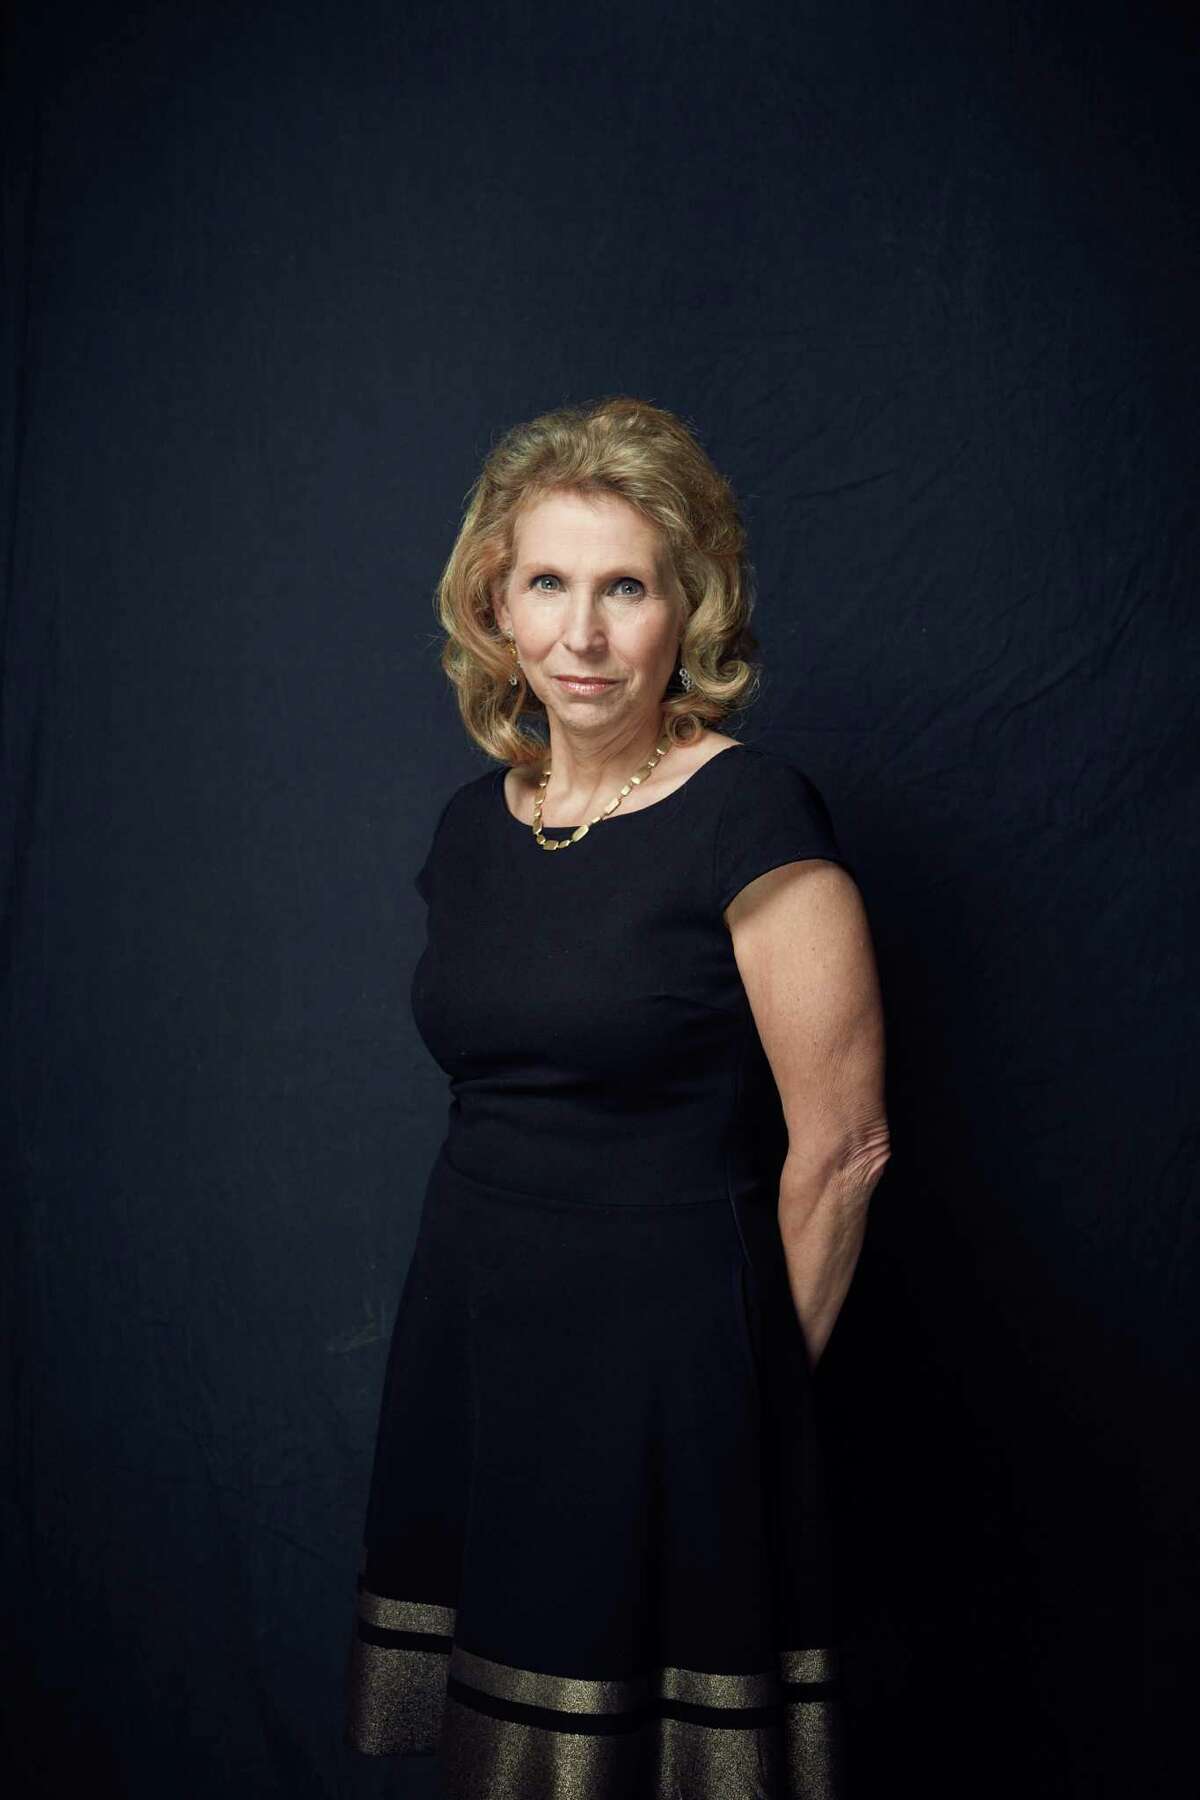 Shari Redstone, vice-chairwoman of CBS and Viacom, and media mogul Sumner RedstoneÂ?’s daughter, in Palm Beach, Fla., March 10, 2016. Redstone says she has patched up her relationship with her father as a legal battle looms over money and power in the family business. (Ryan Stone/The New York Times)